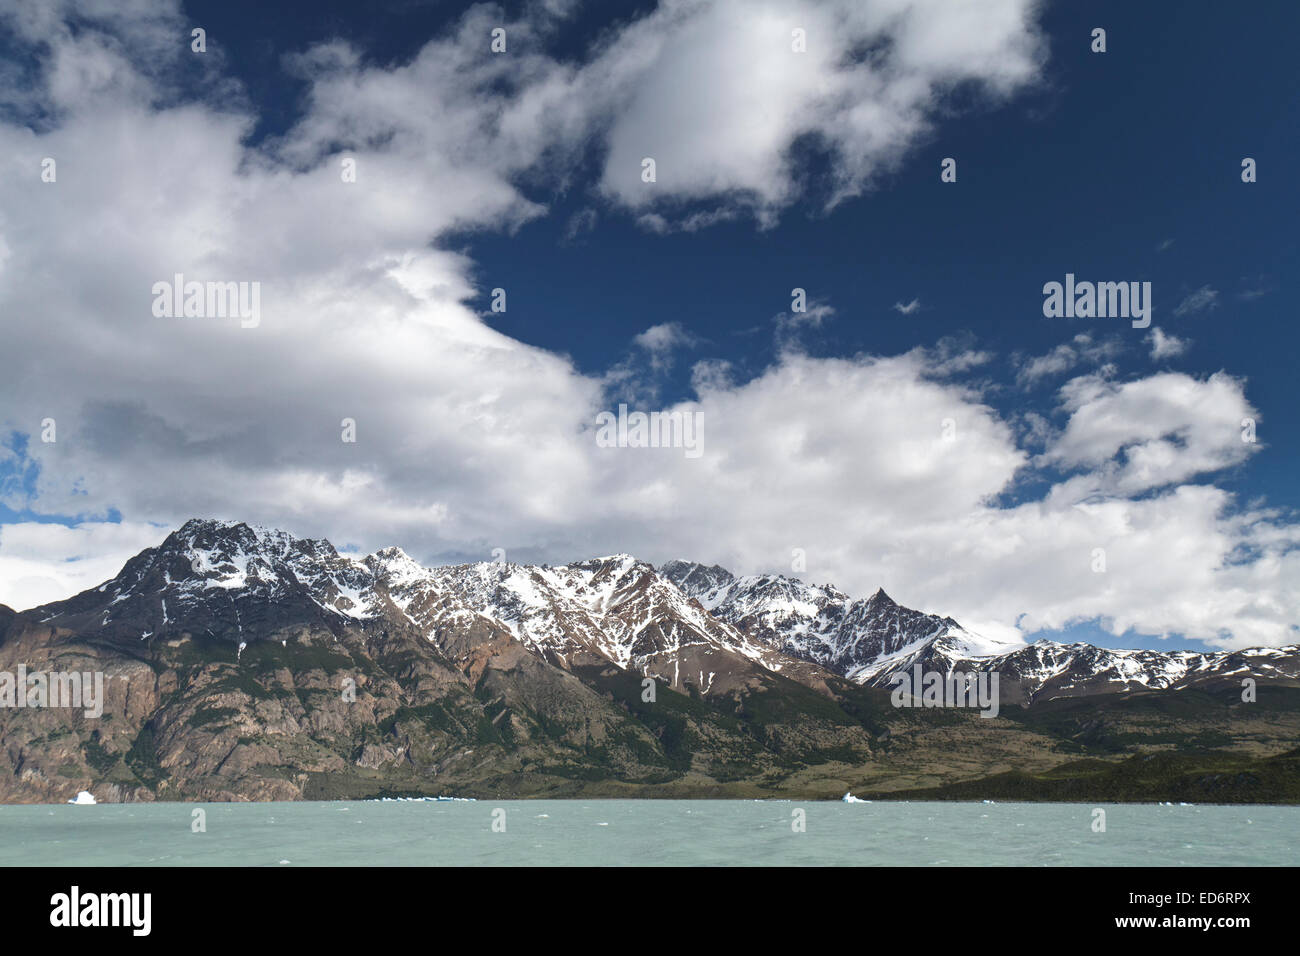 Mountain range on the shores of Lake Viedma In Argentina, Patagonia with icebergs seen floating on the lake. Stock Photo